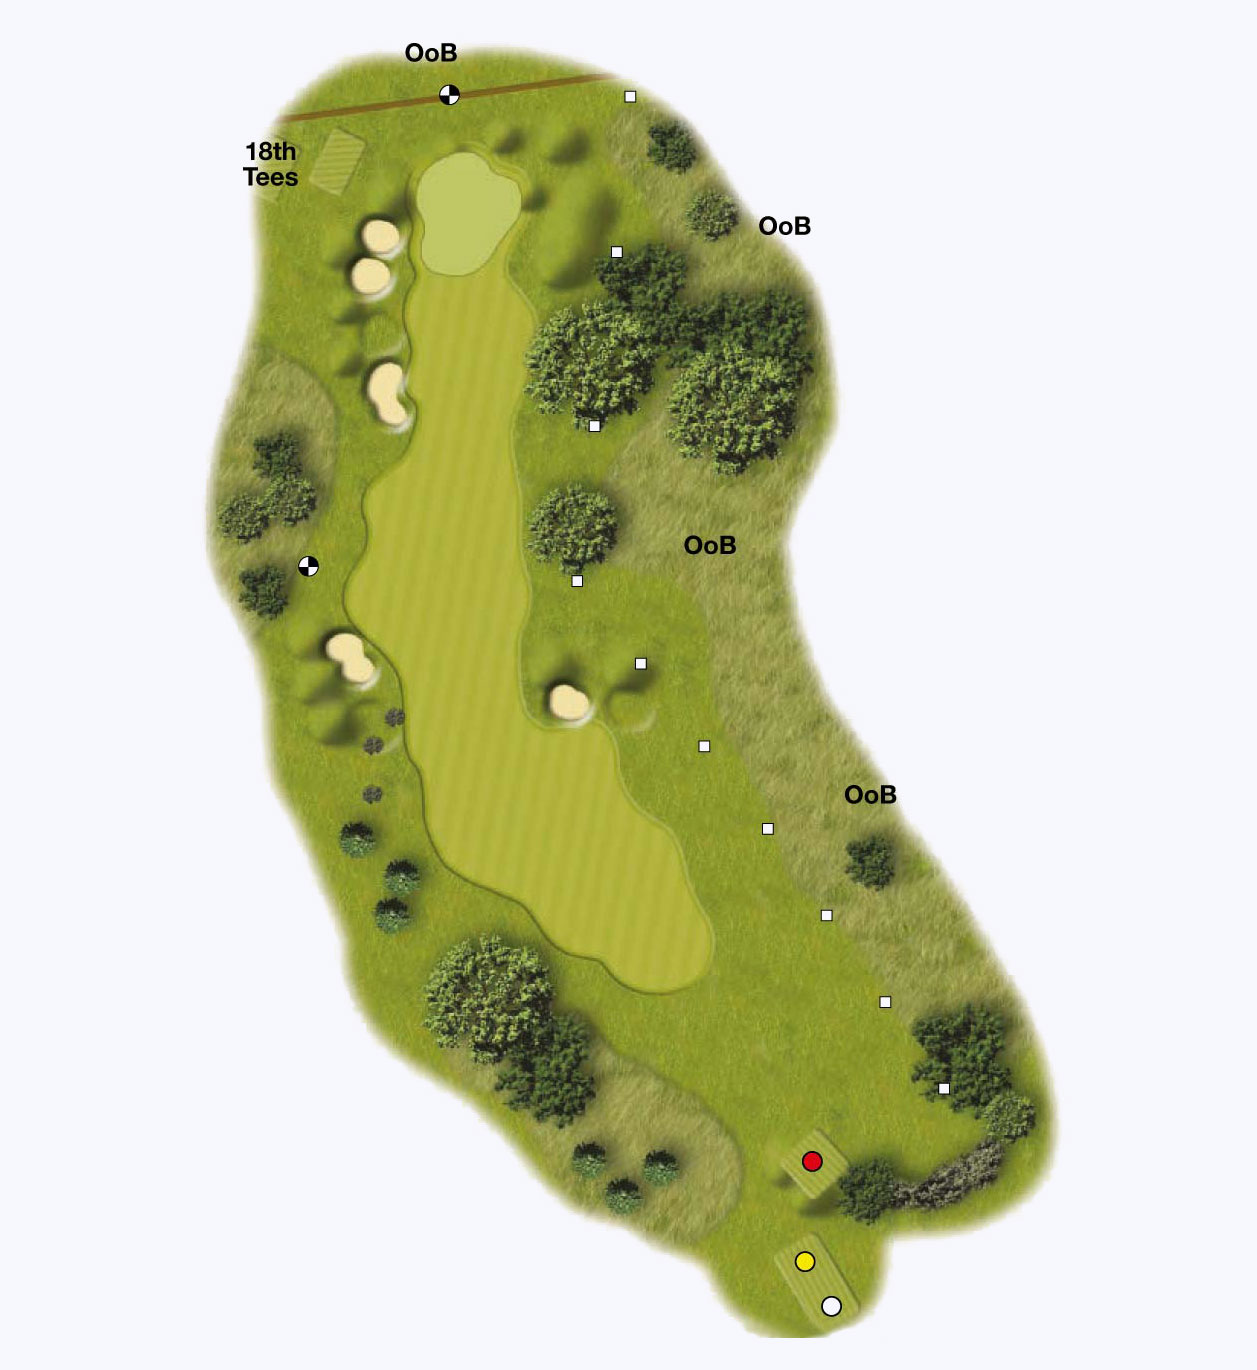 golf course map